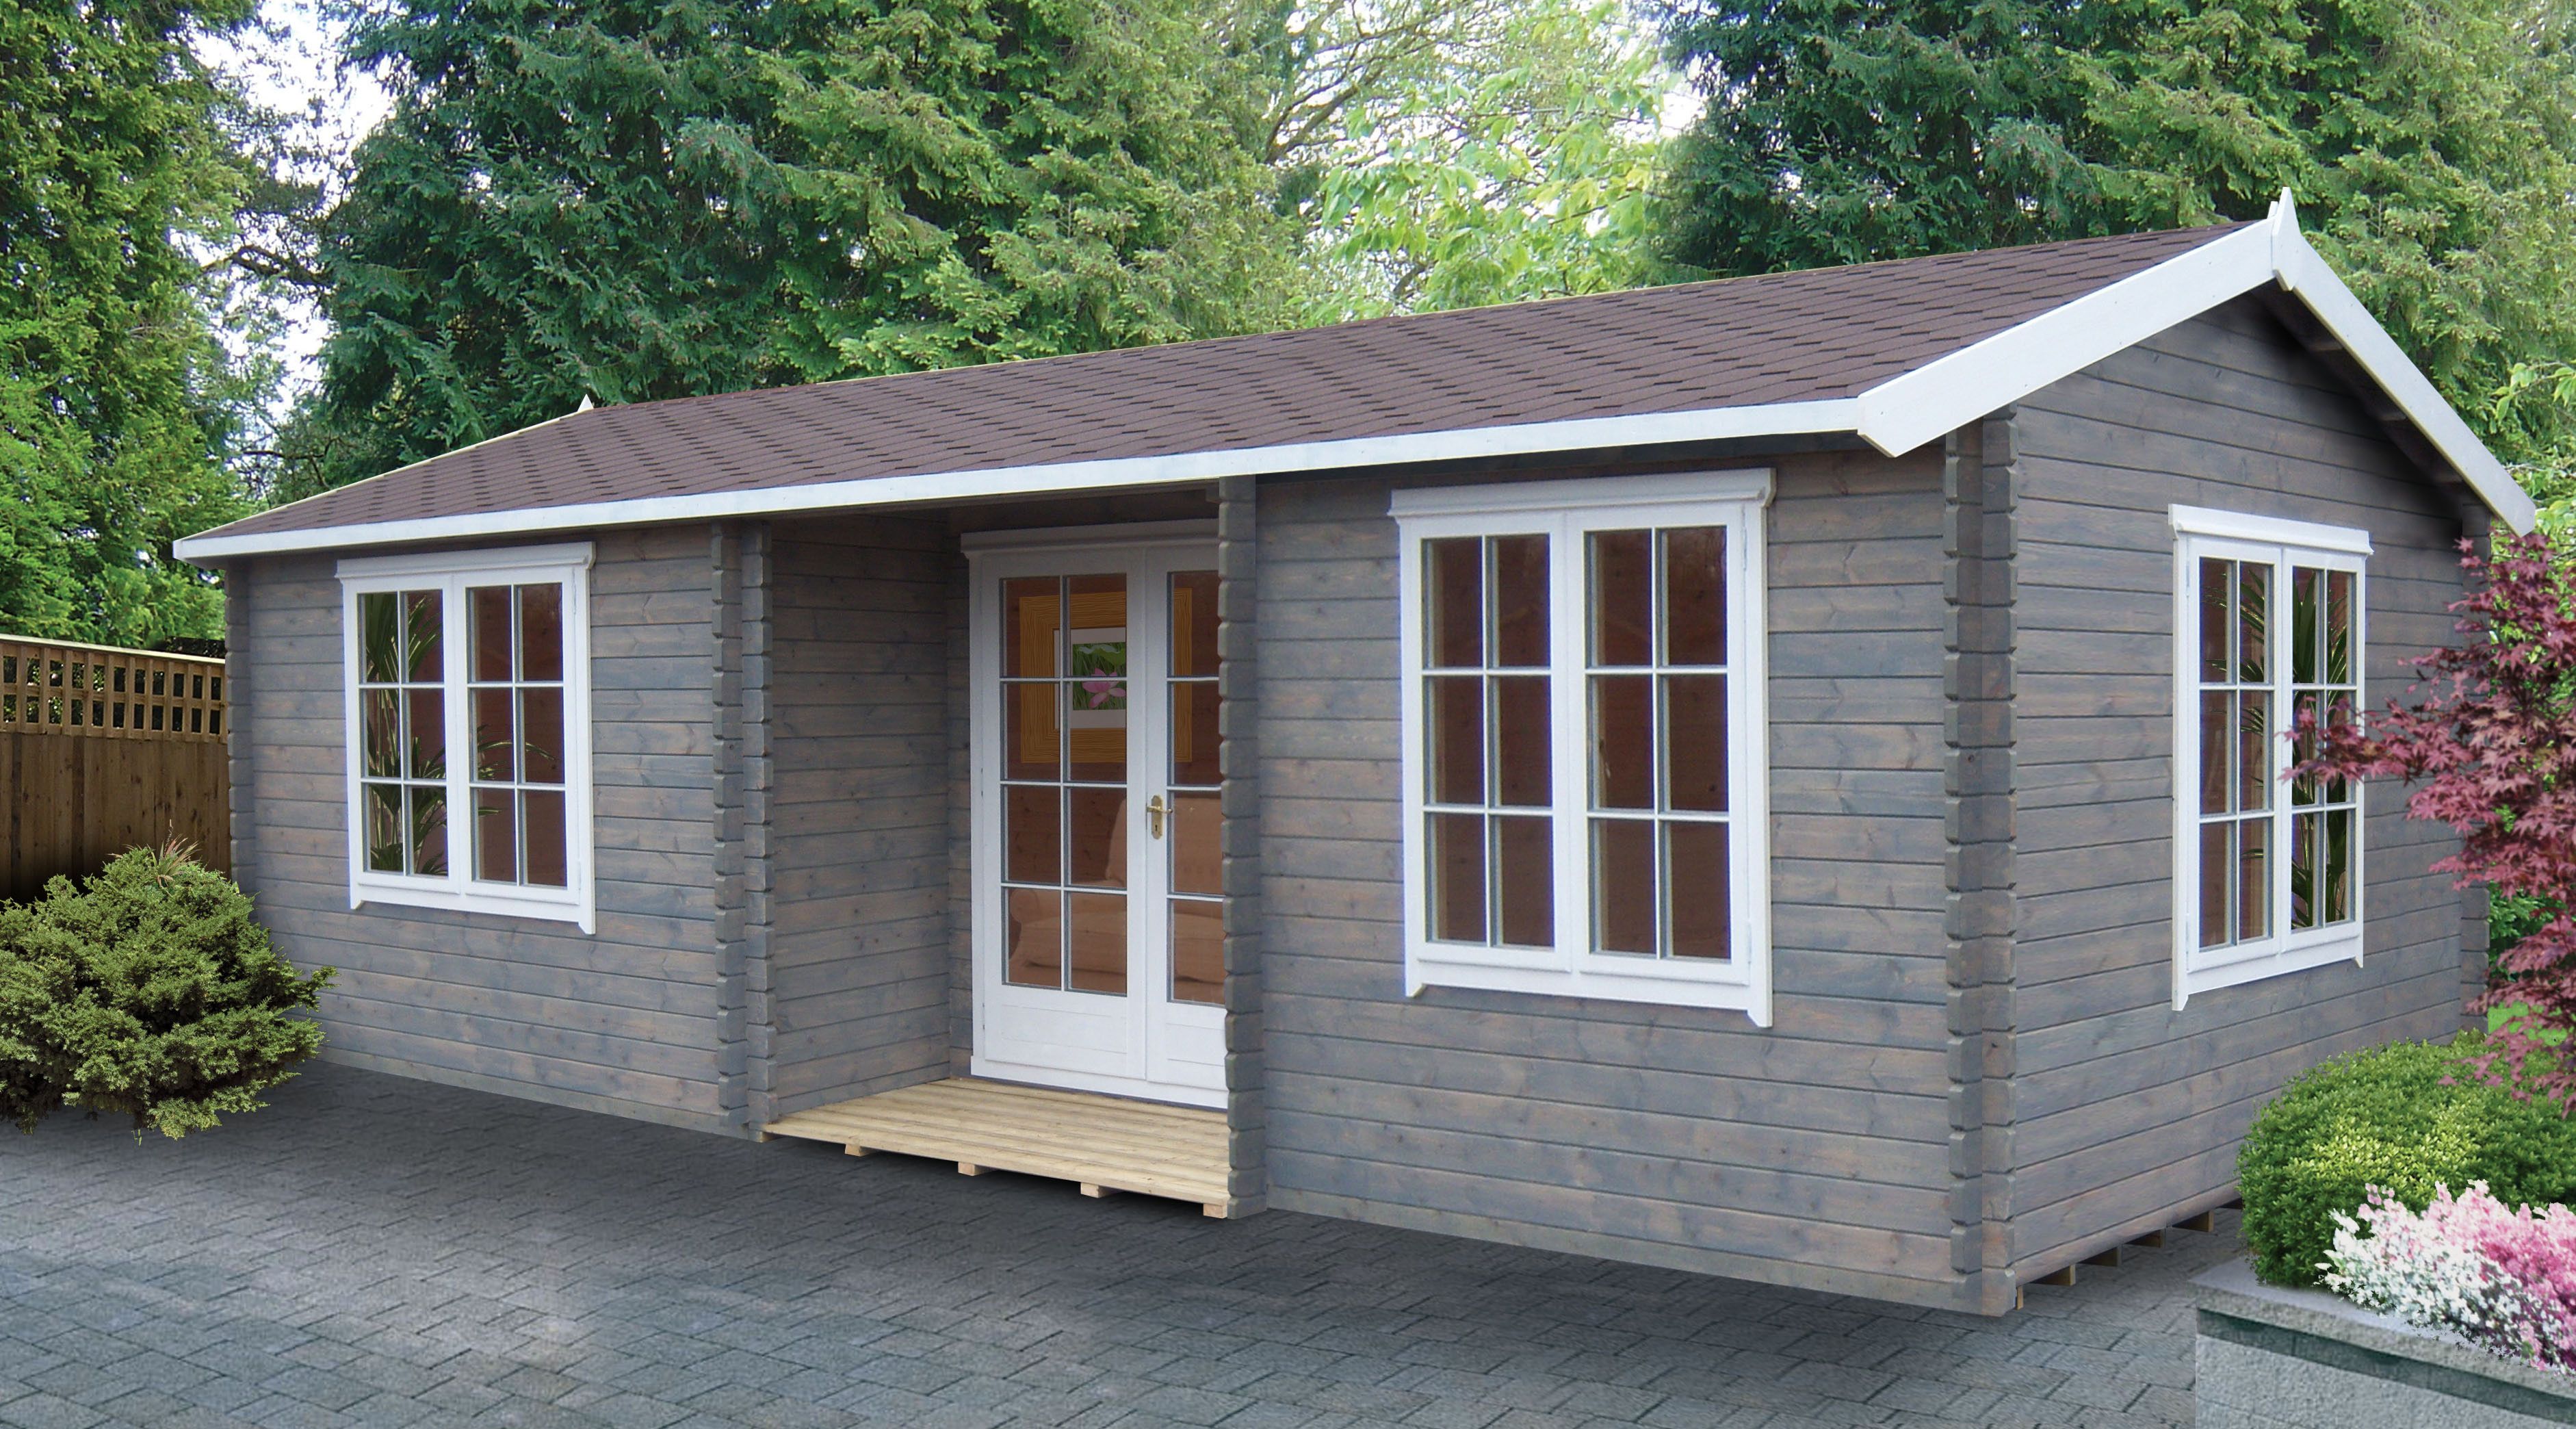 Information about wooden sheds | Pineca.de | Pineca